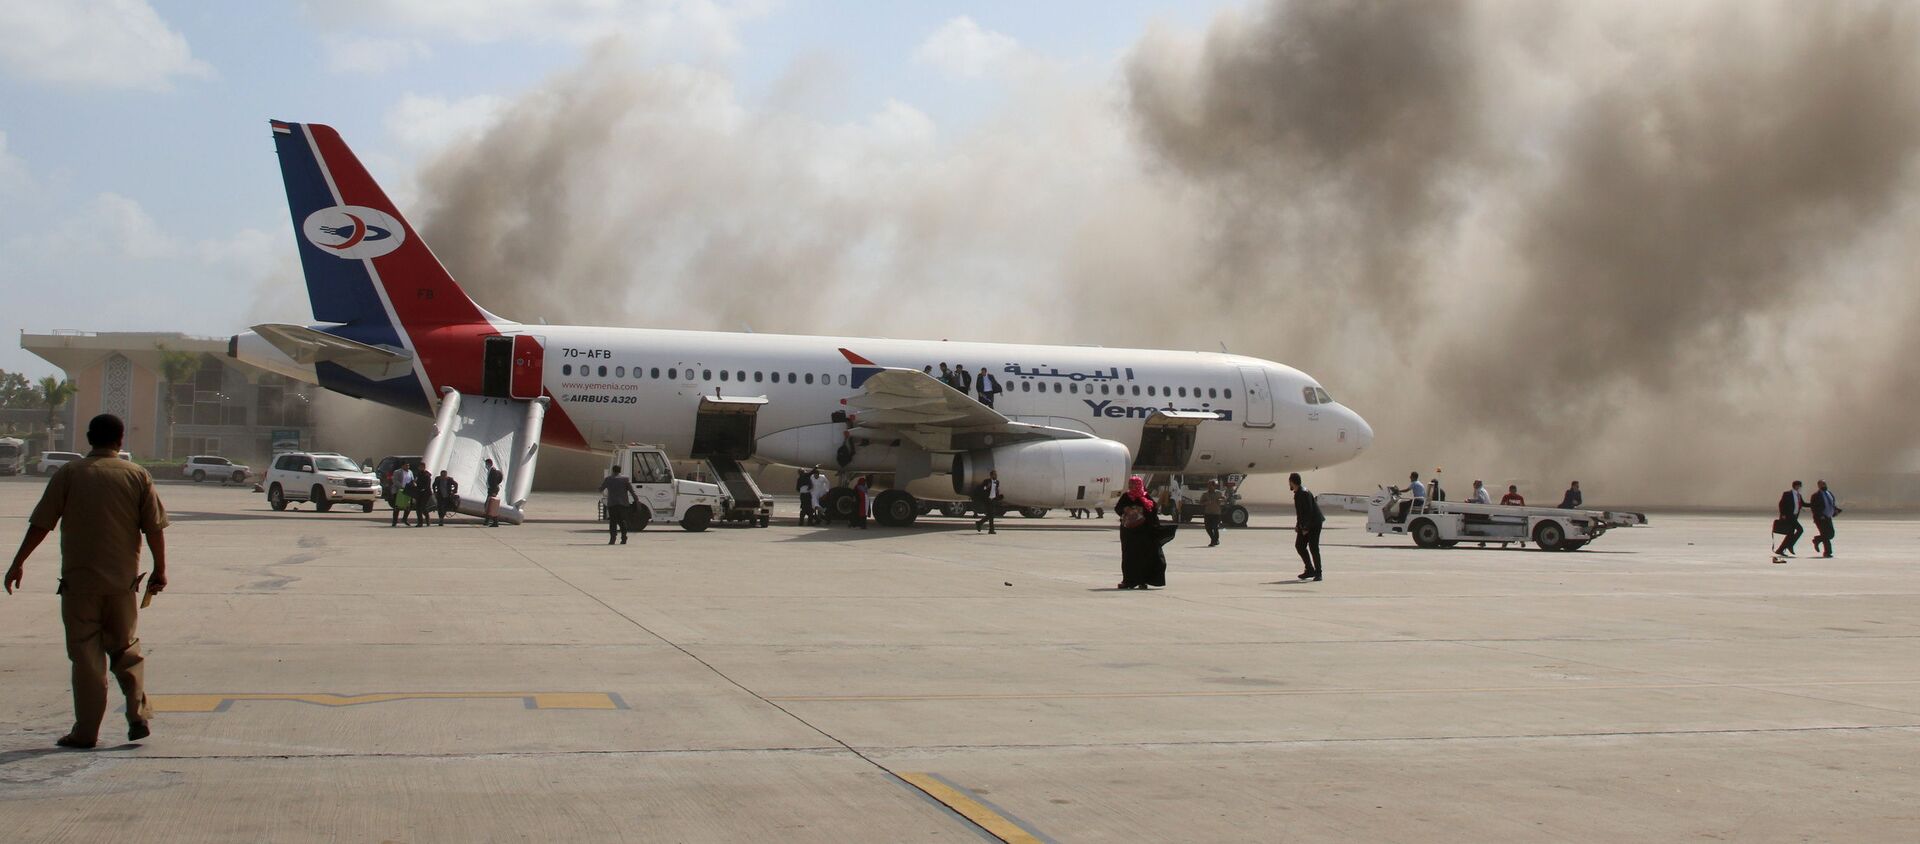 Dust rises after explosions hit Aden airport, upon the arrival of the newly-formed Yemeni government in Aden, Yemen December 30, 2020 - Sputnik International, 1920, 30.12.2020